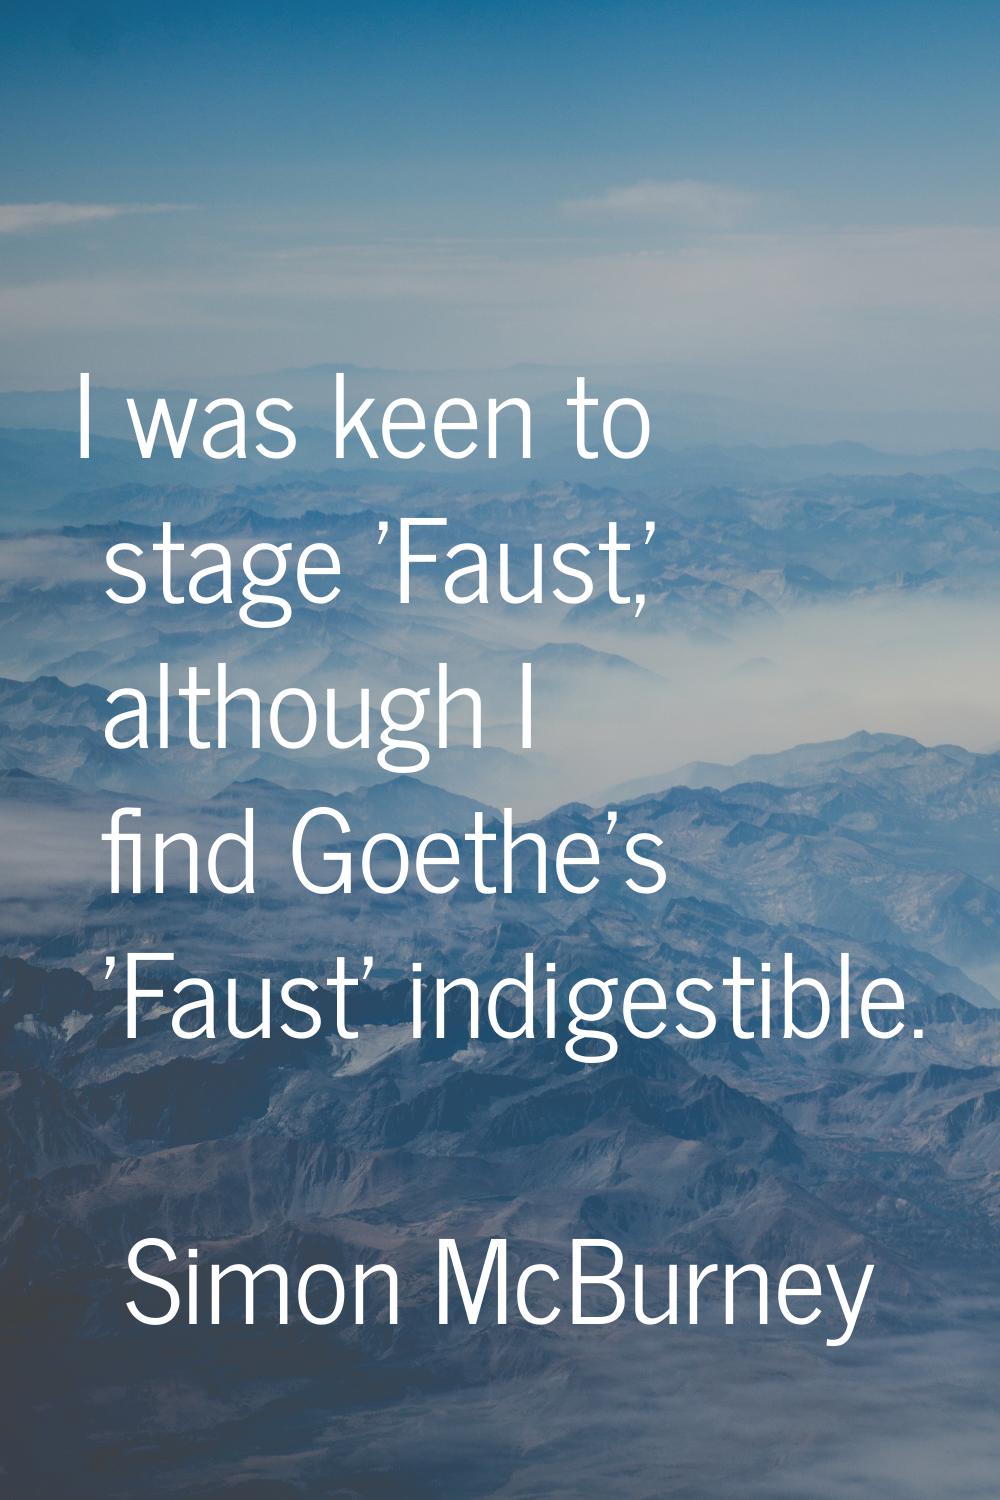 I was keen to stage 'Faust,' although I find Goethe's 'Faust' indigestible.